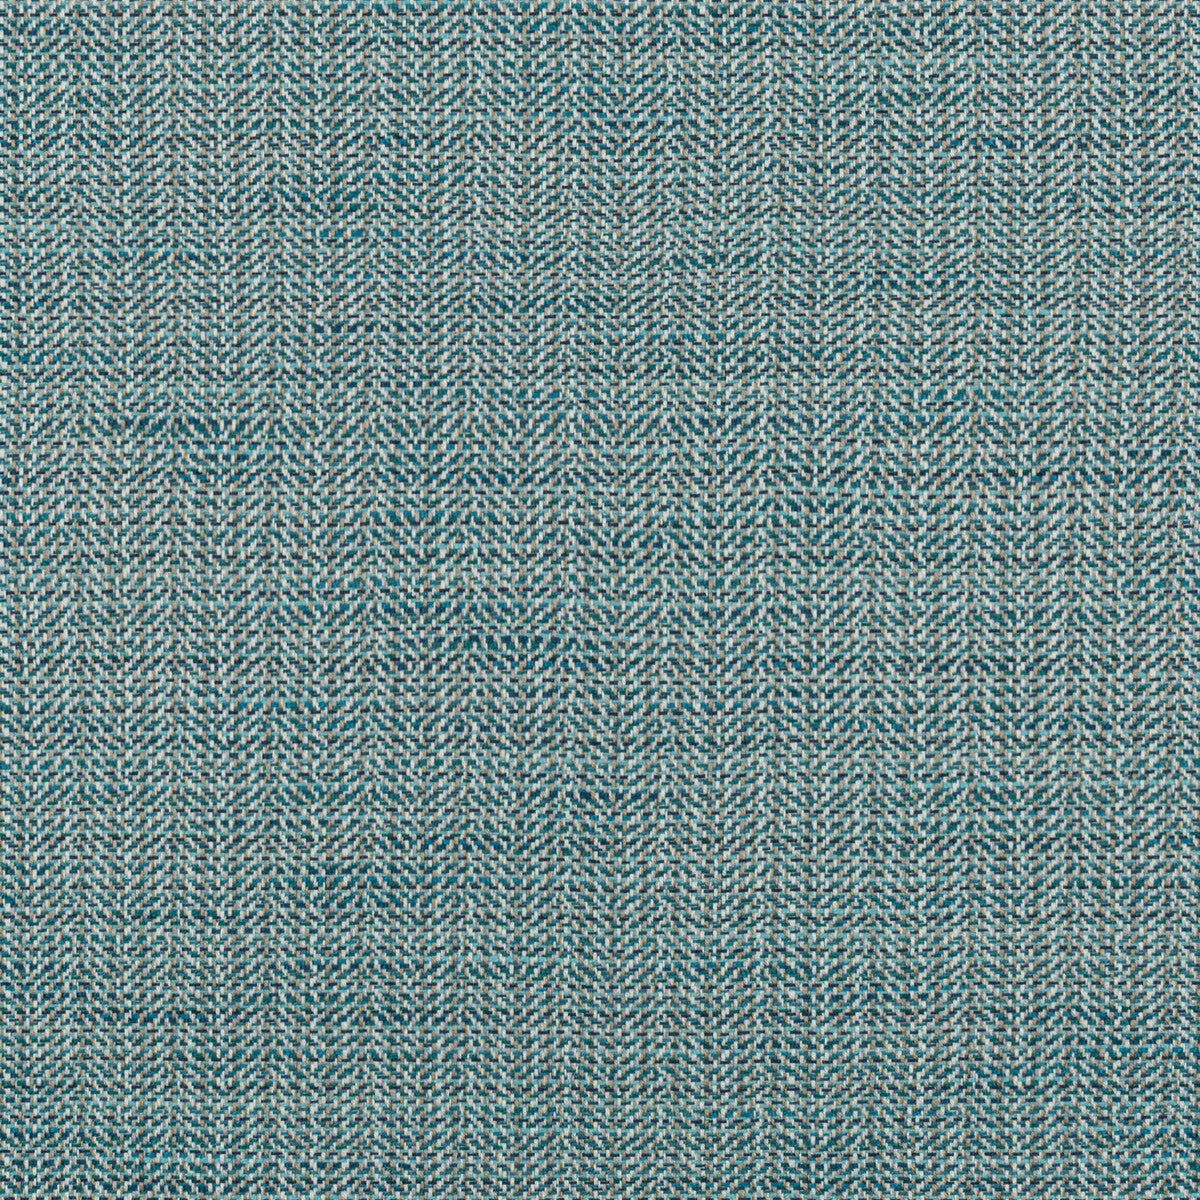 Kravet Smart fabric in 35963-35 color - pattern 35963.35.0 - by Kravet Smart in the Performance Crypton Home collection